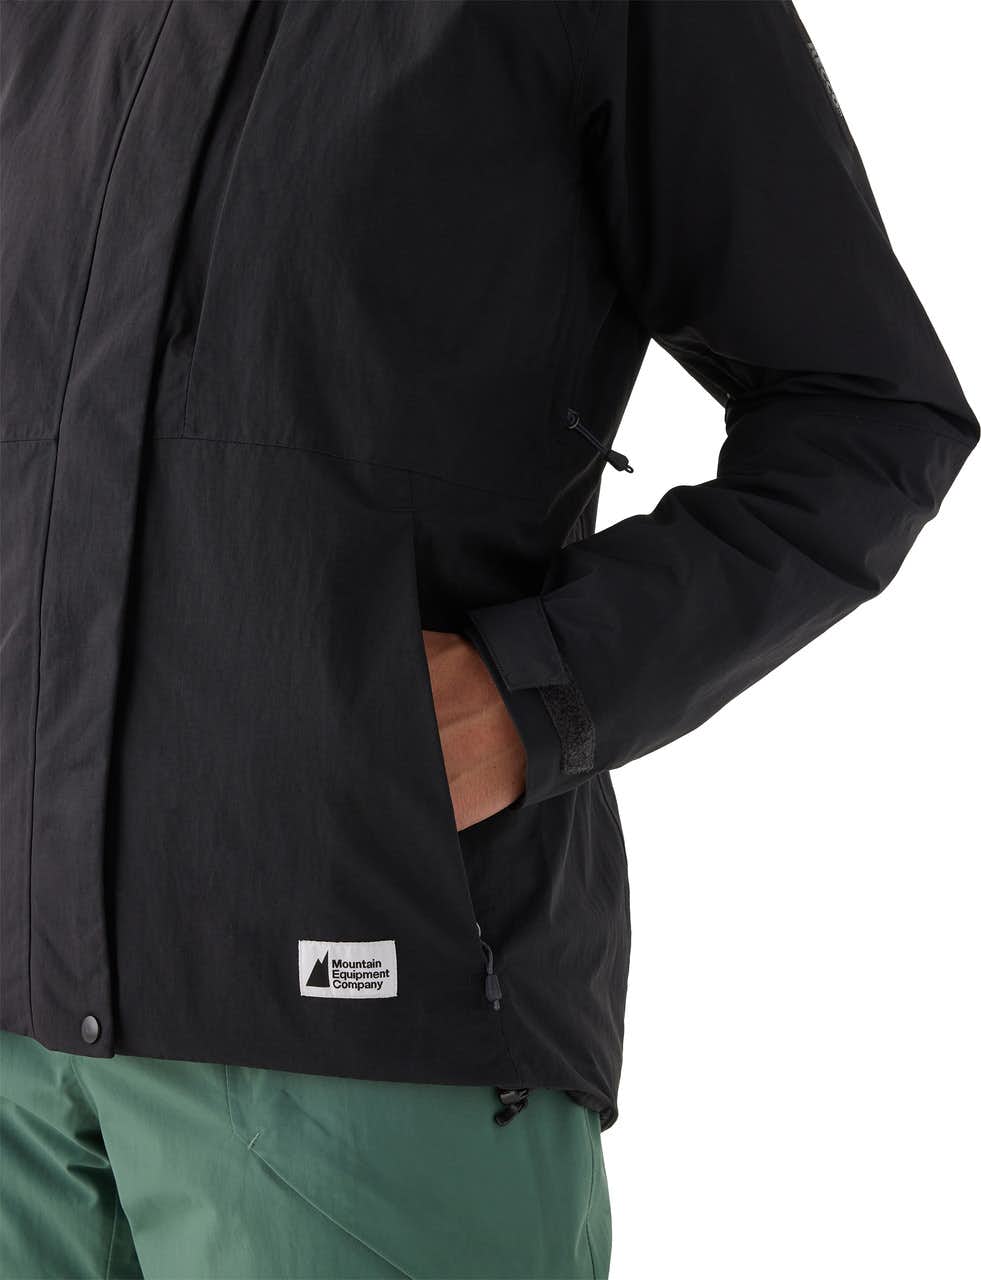 Fall-Line Insulated Jacket Black